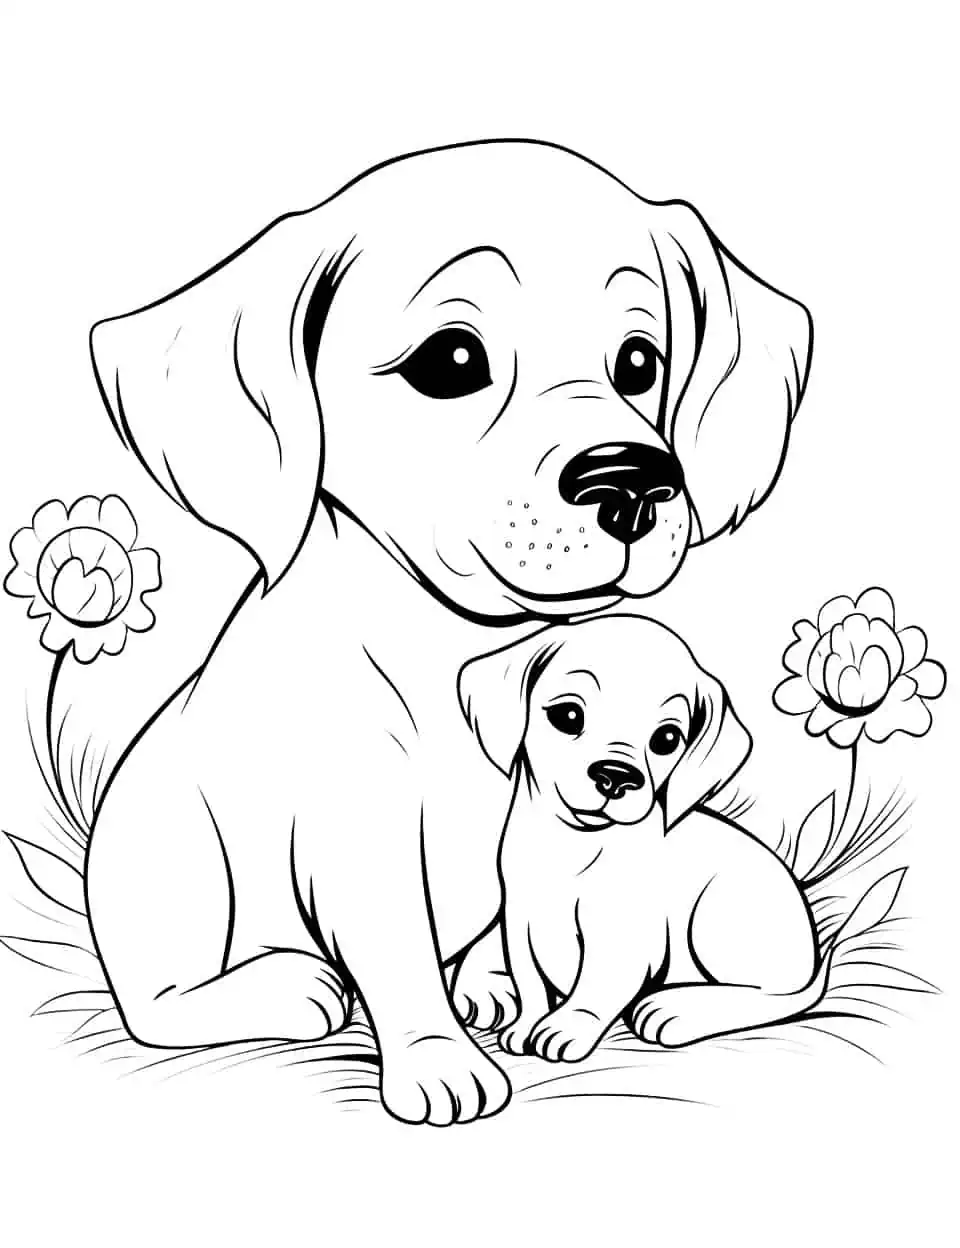 Baby Dog and Mother Coloring Page - A heartwarming scene of a baby dog cuddling with its mother.